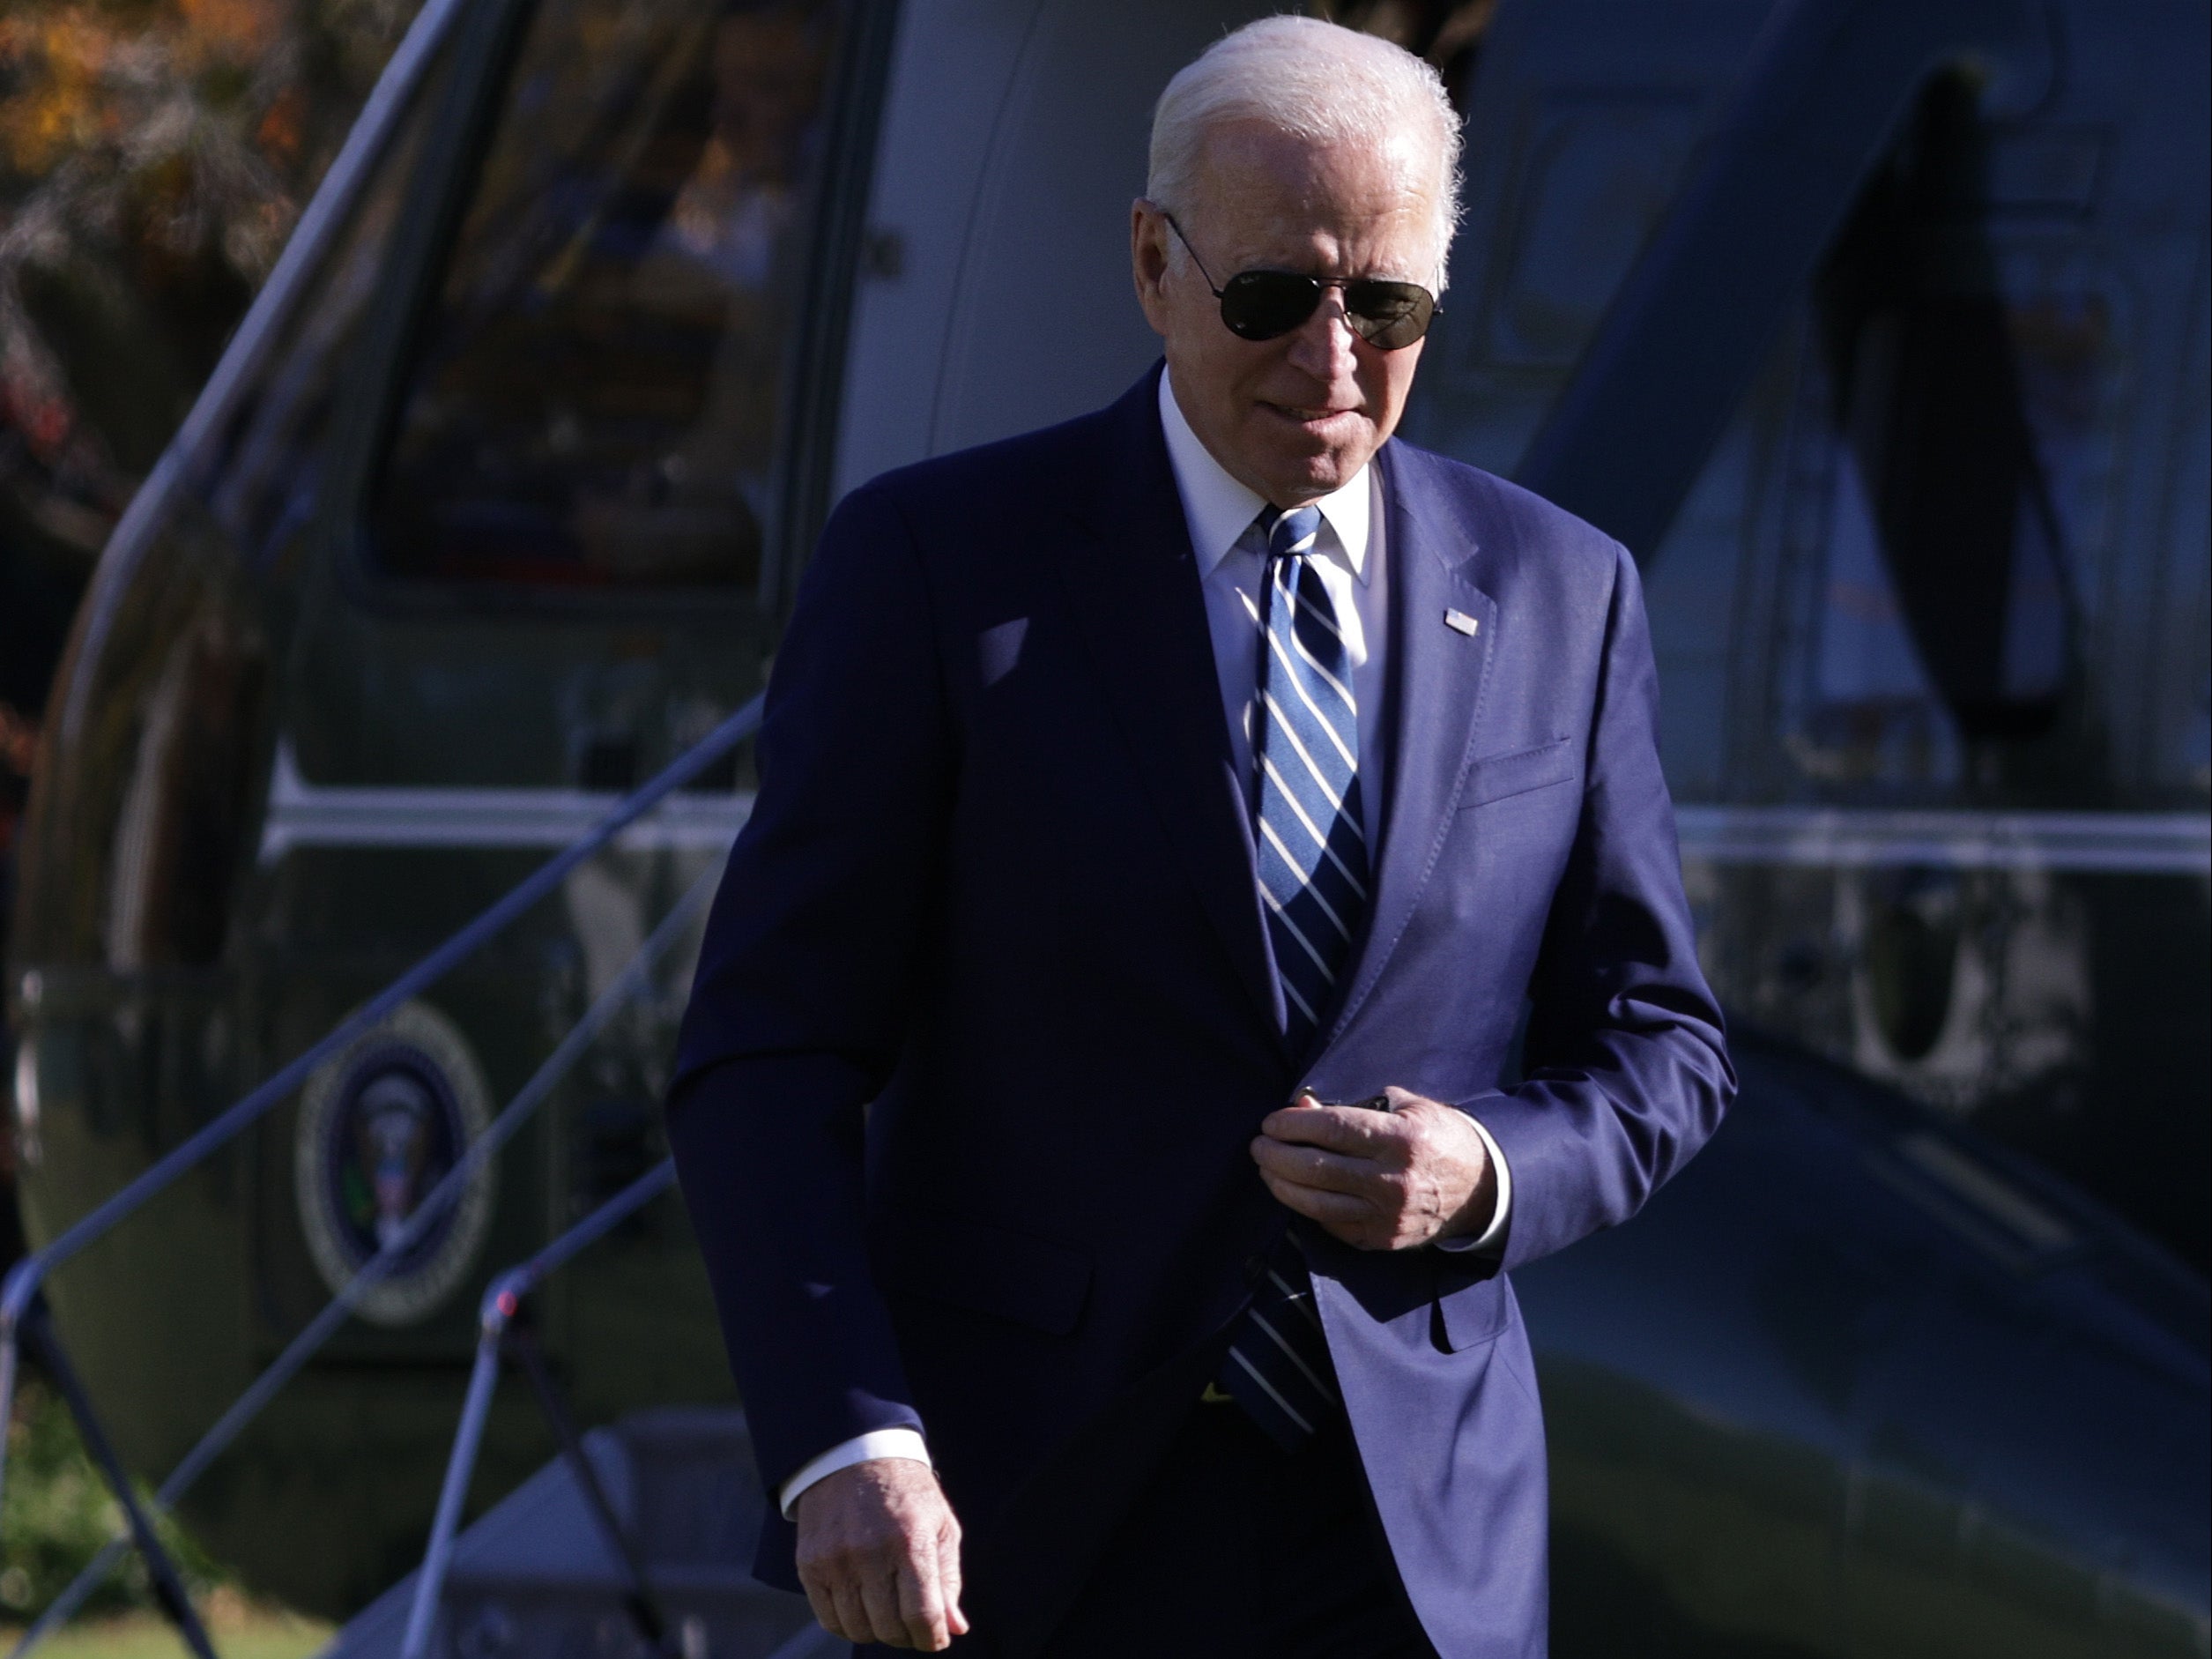 Joe Biden ‘feels great’ after hospital visit to undergo routine physical